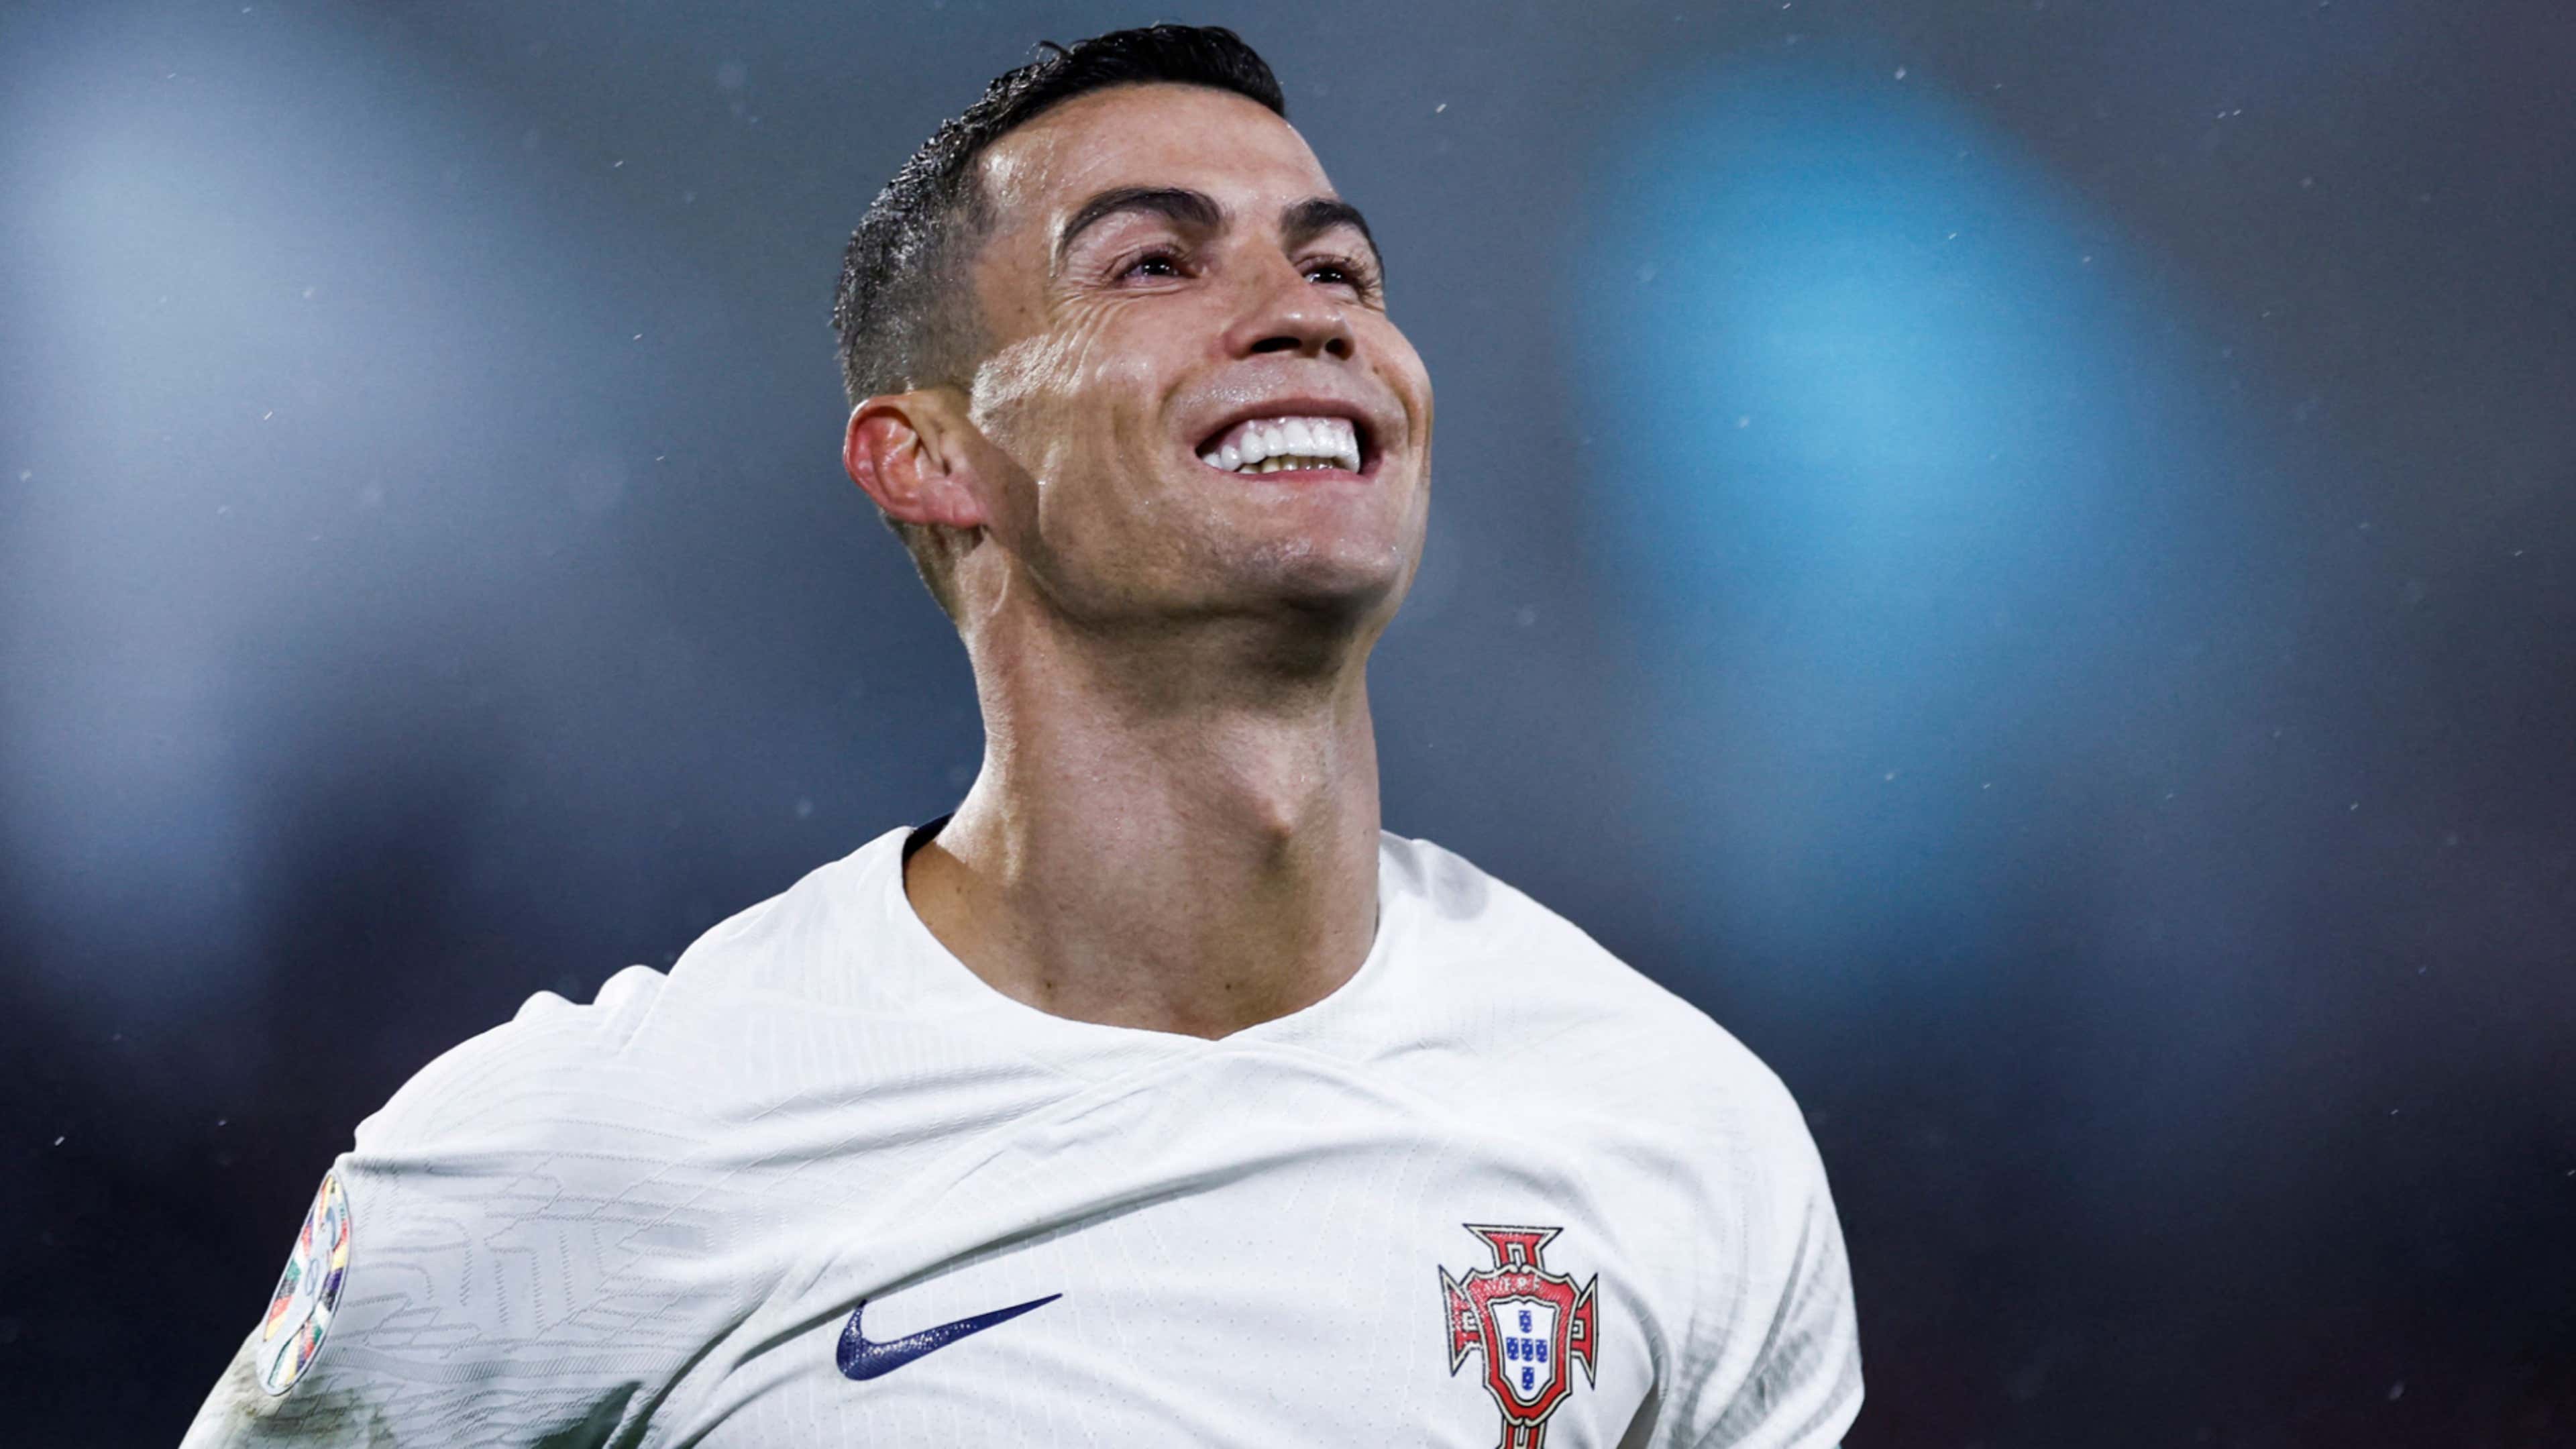 WATCH: Cristiano Ronaldo tells cameraman to stop zooming in on his face -  or his wrinkles will be revealed | Goal.com US